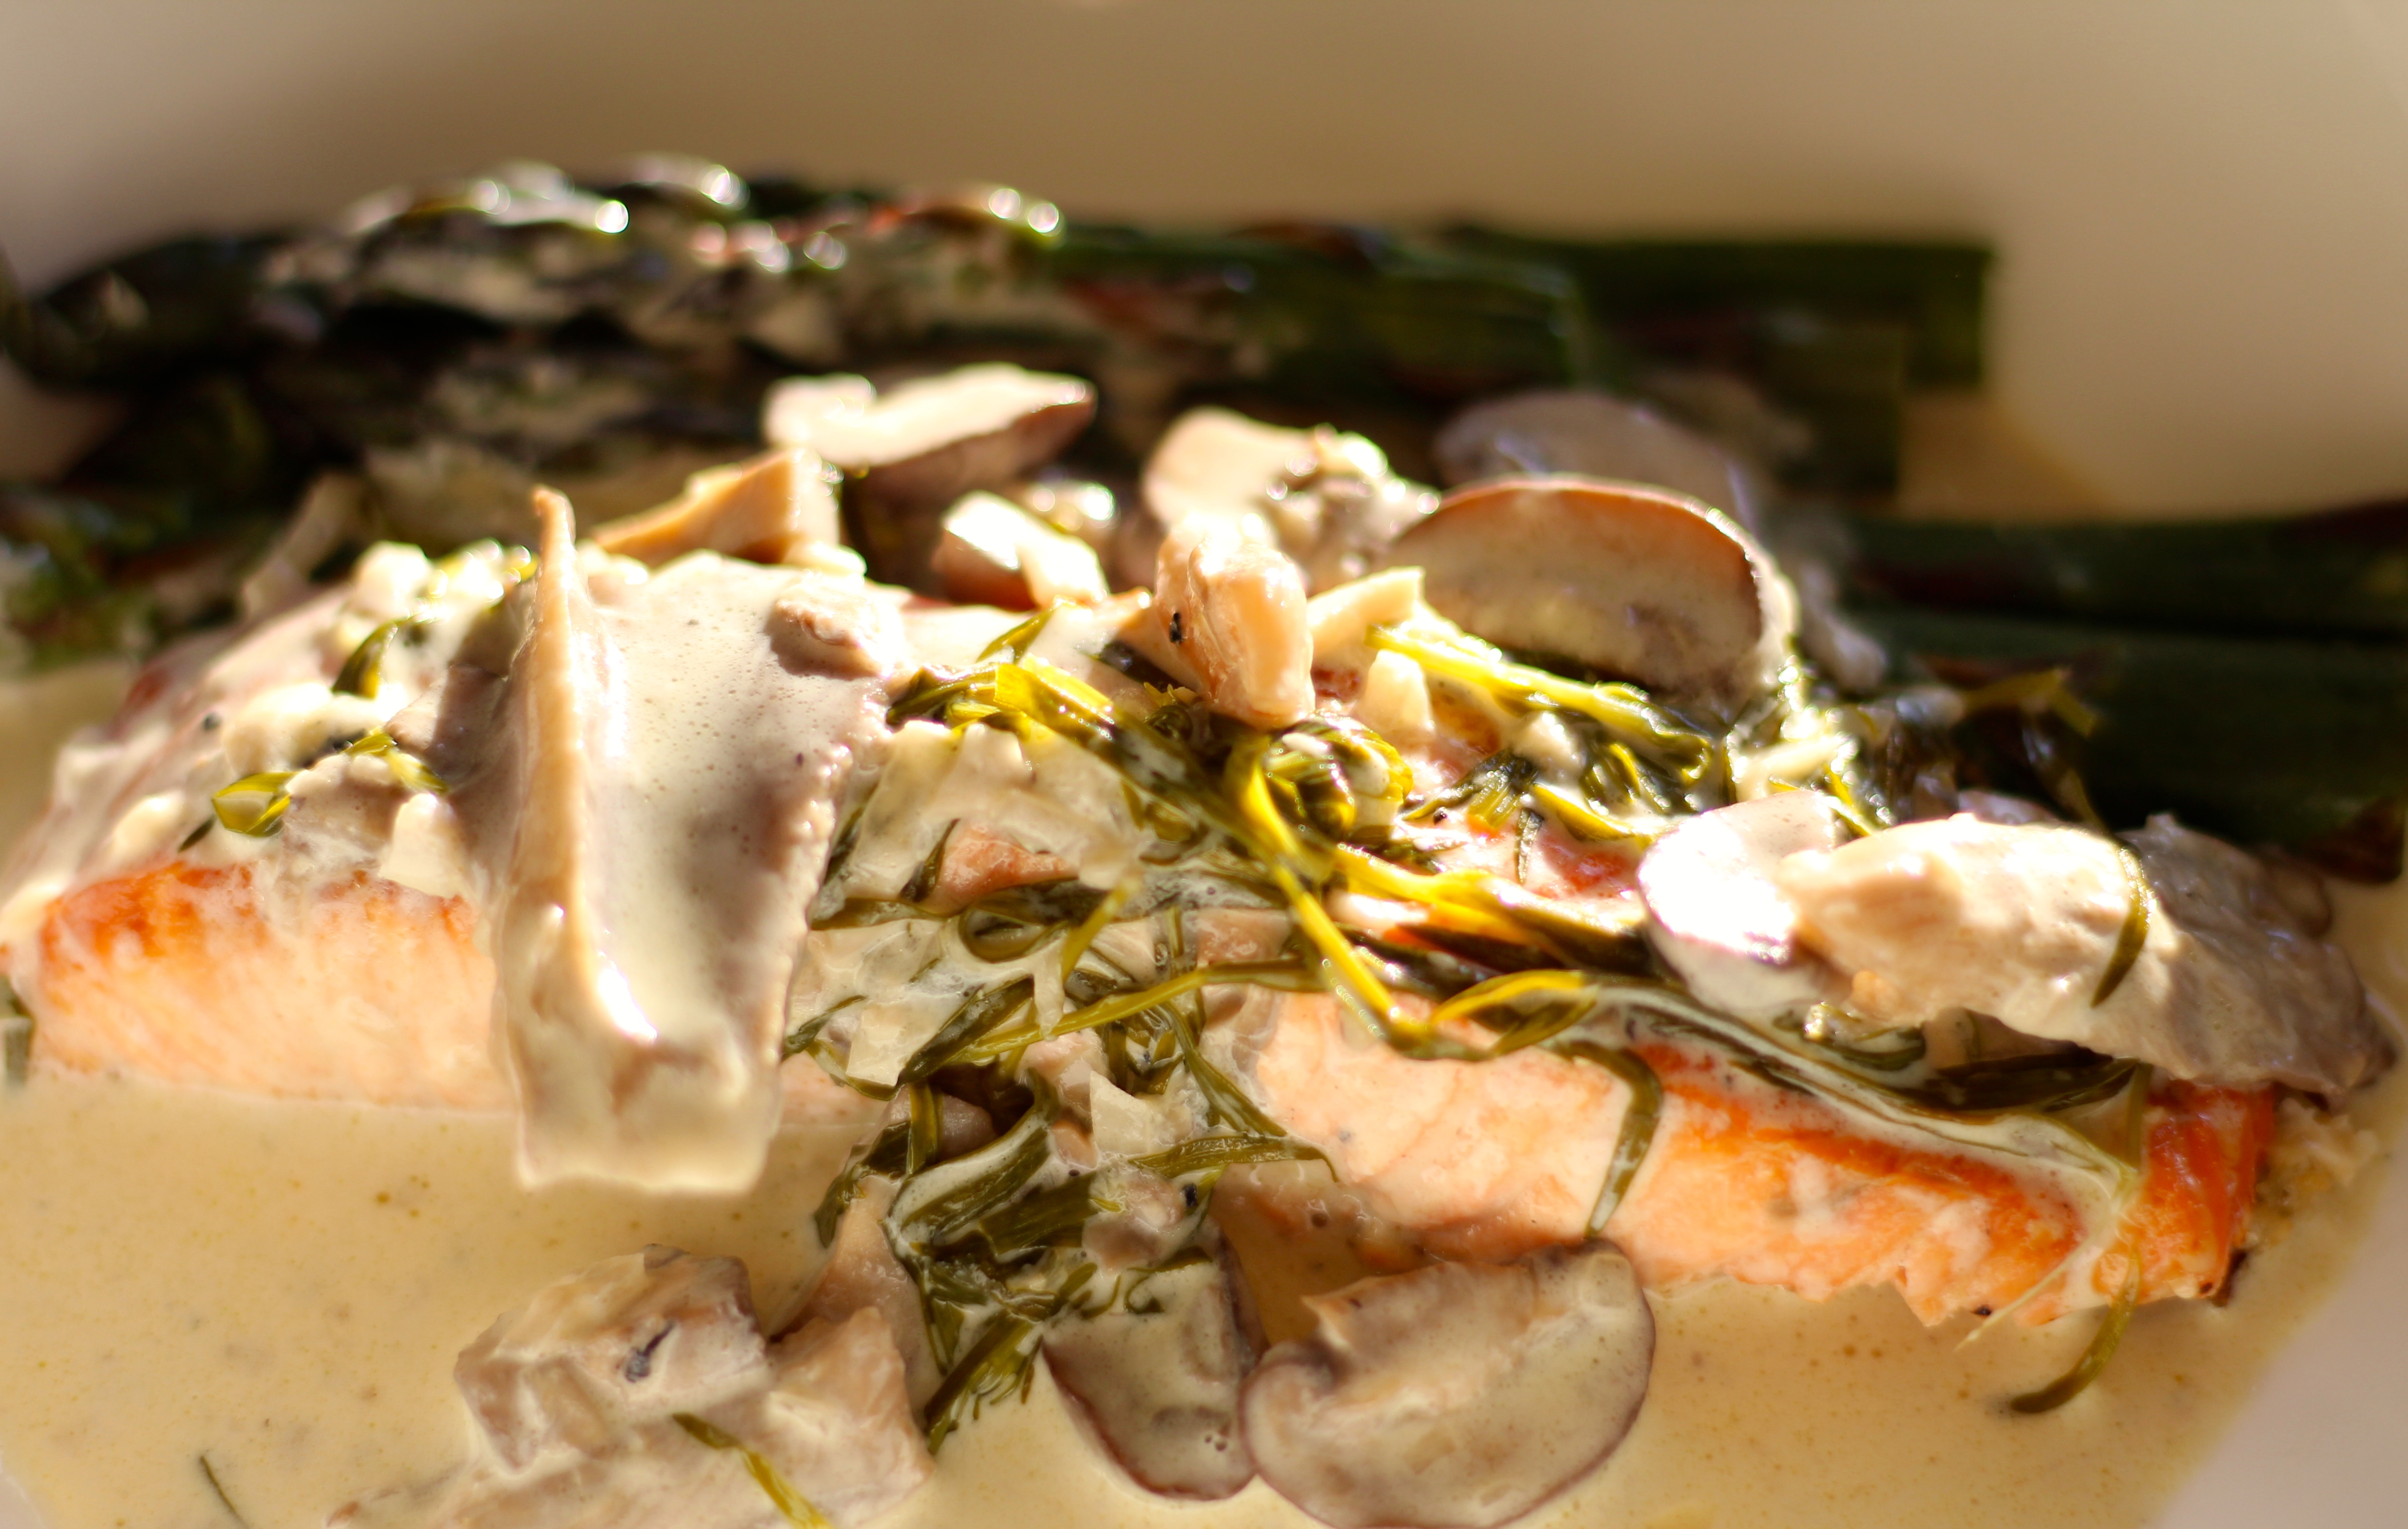 SALMON IN CHAMPAGNE SAUCE